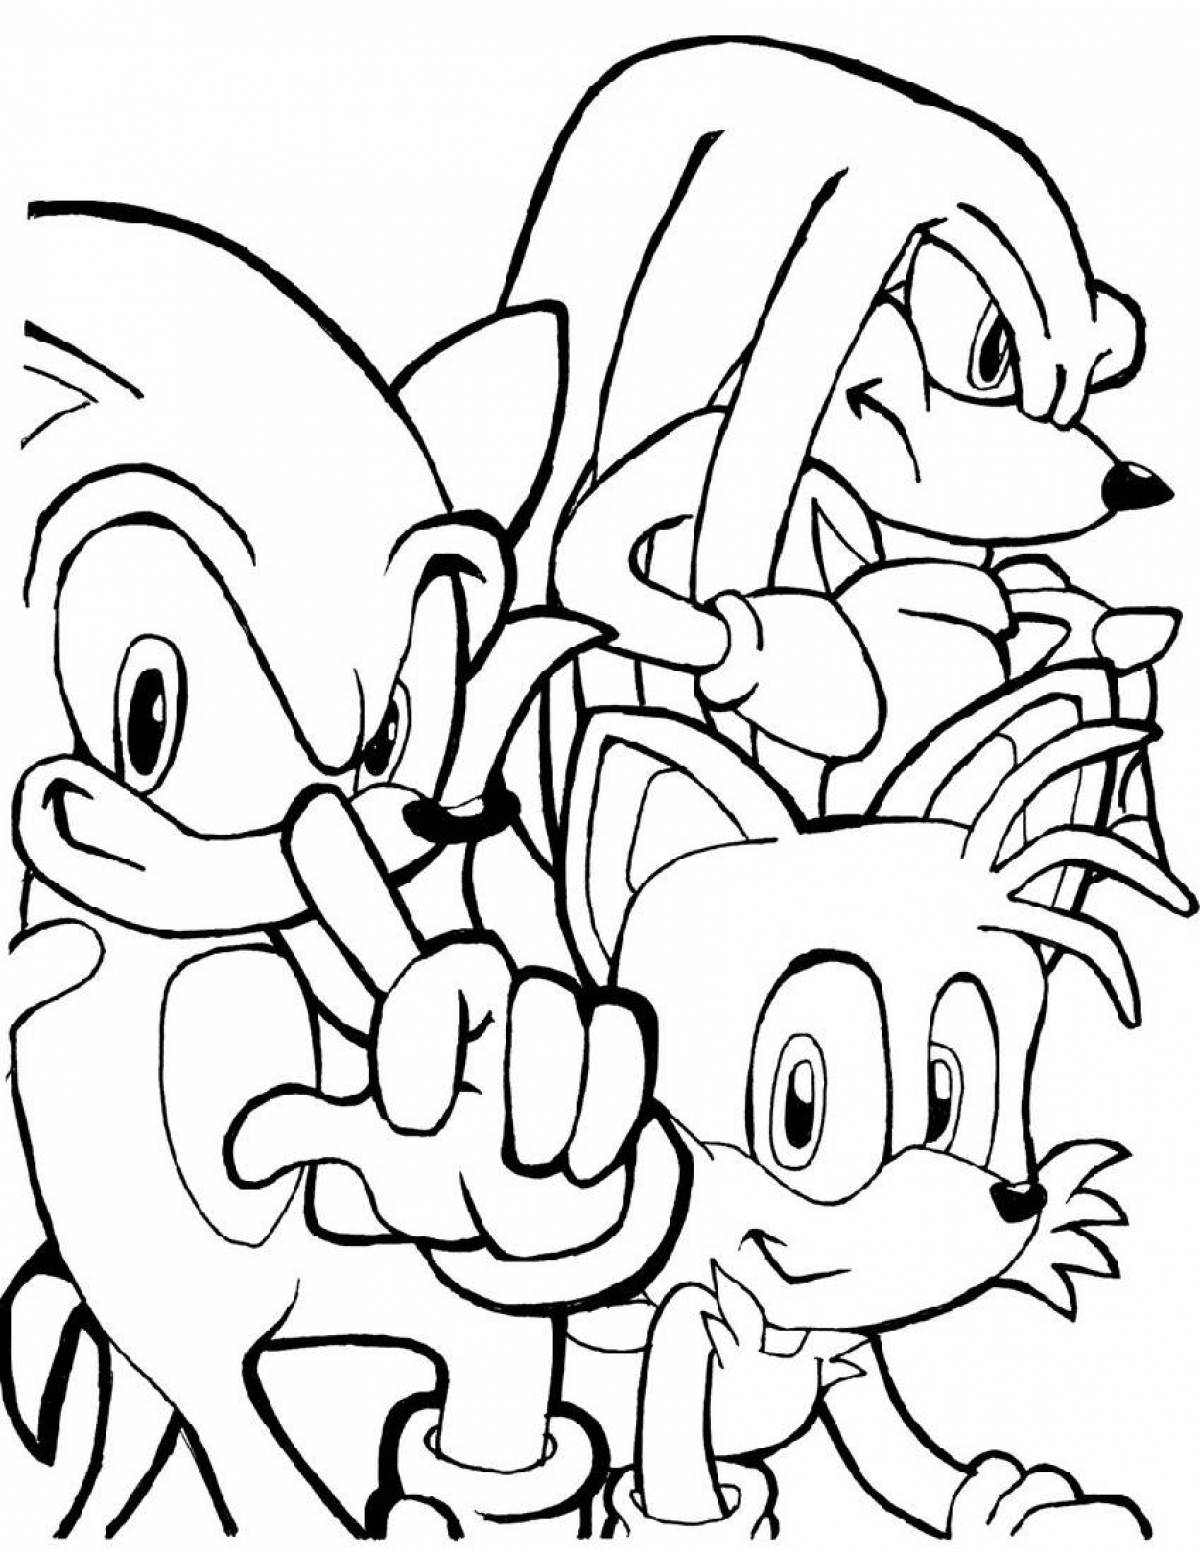 Enthusiastic Sonic and his friends